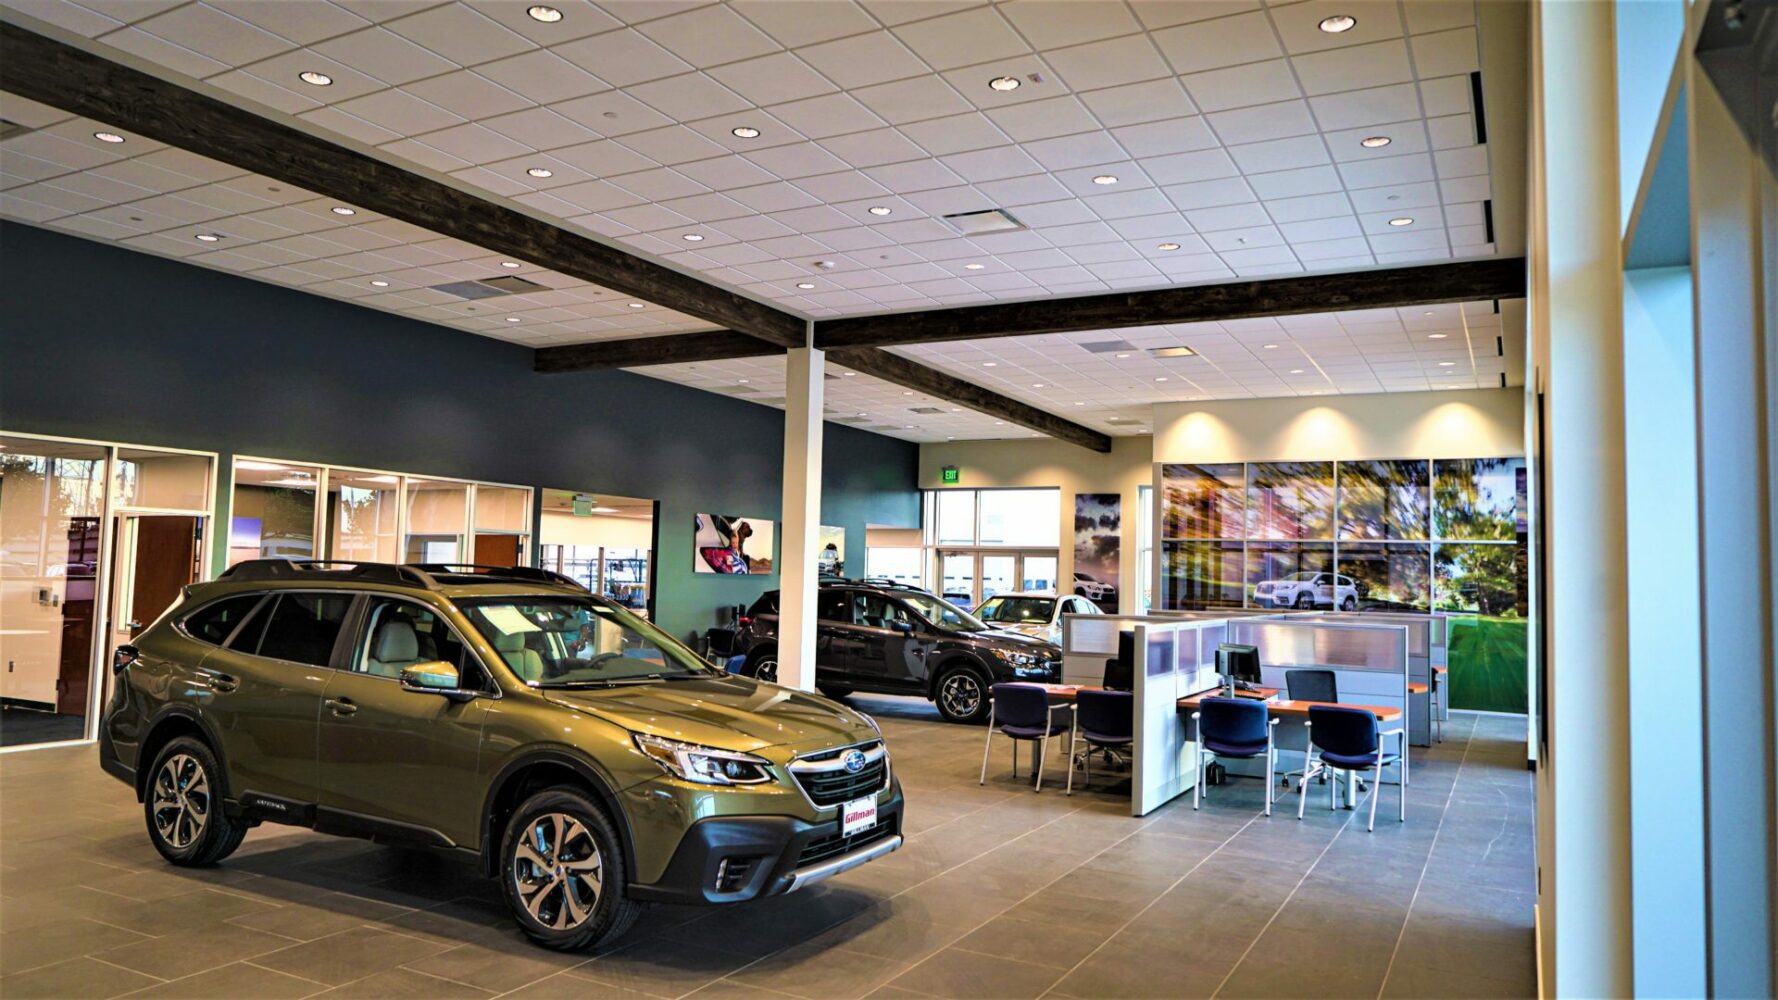 led lighting high output troffers in car dealership